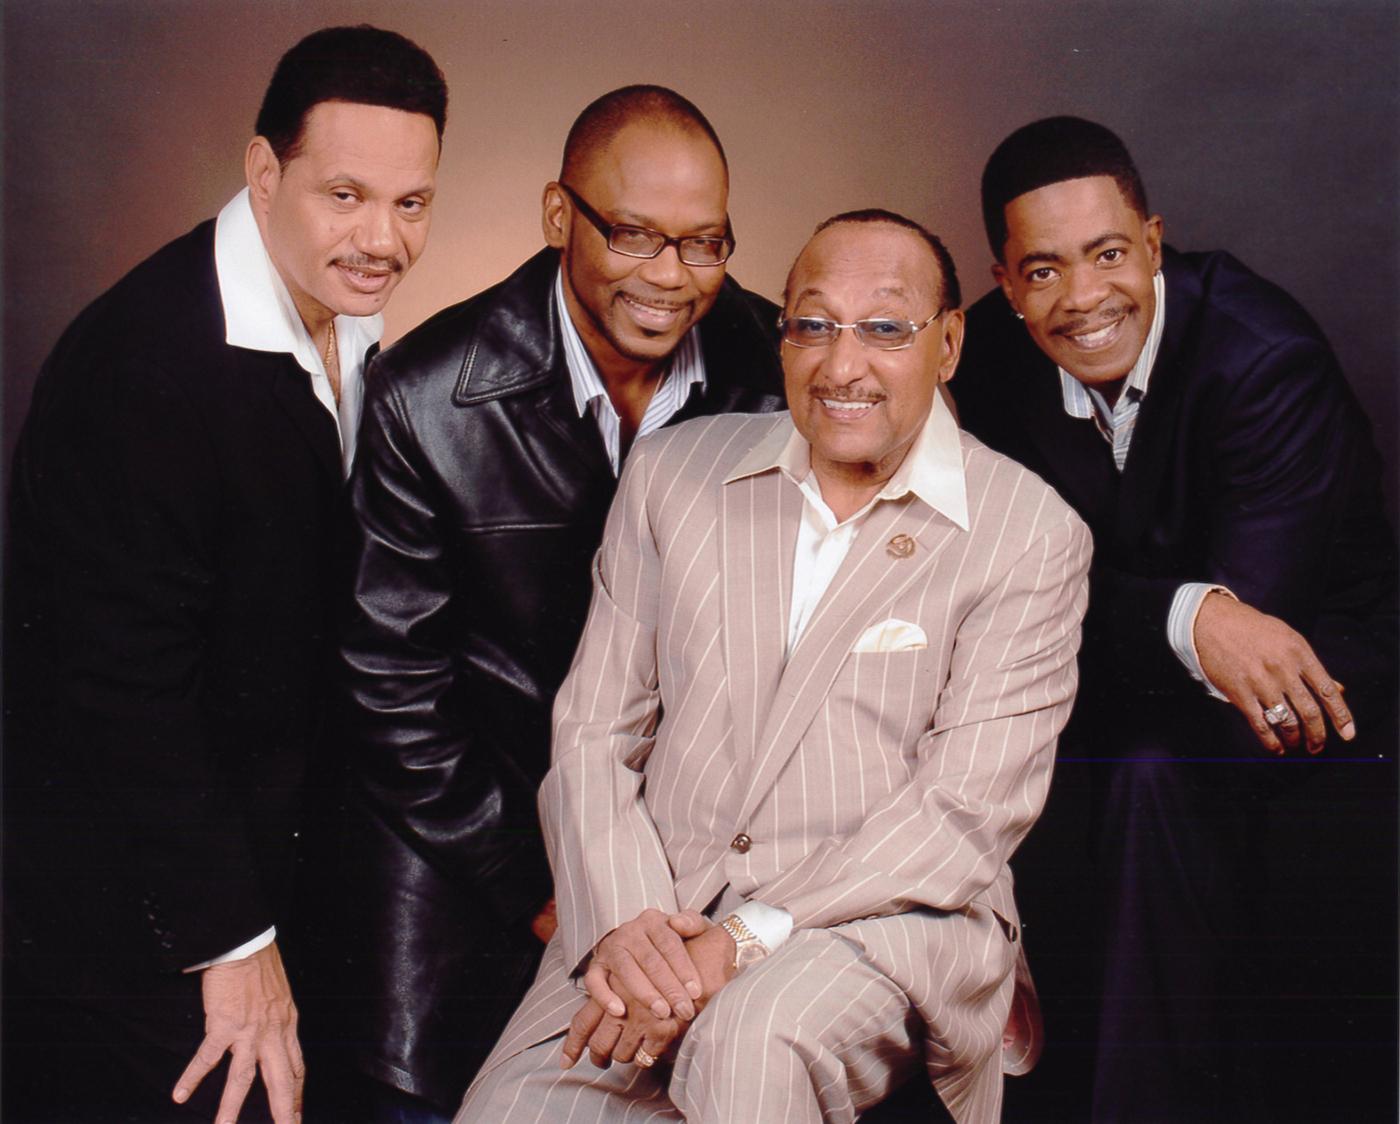 Soul group The Four Tops.